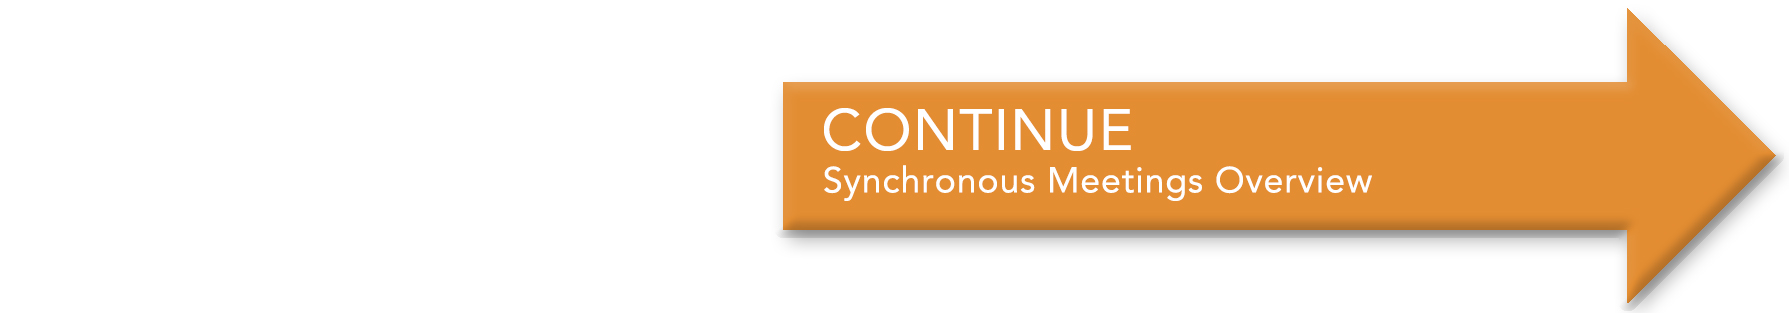 continue to Synchronous Meetings Overview